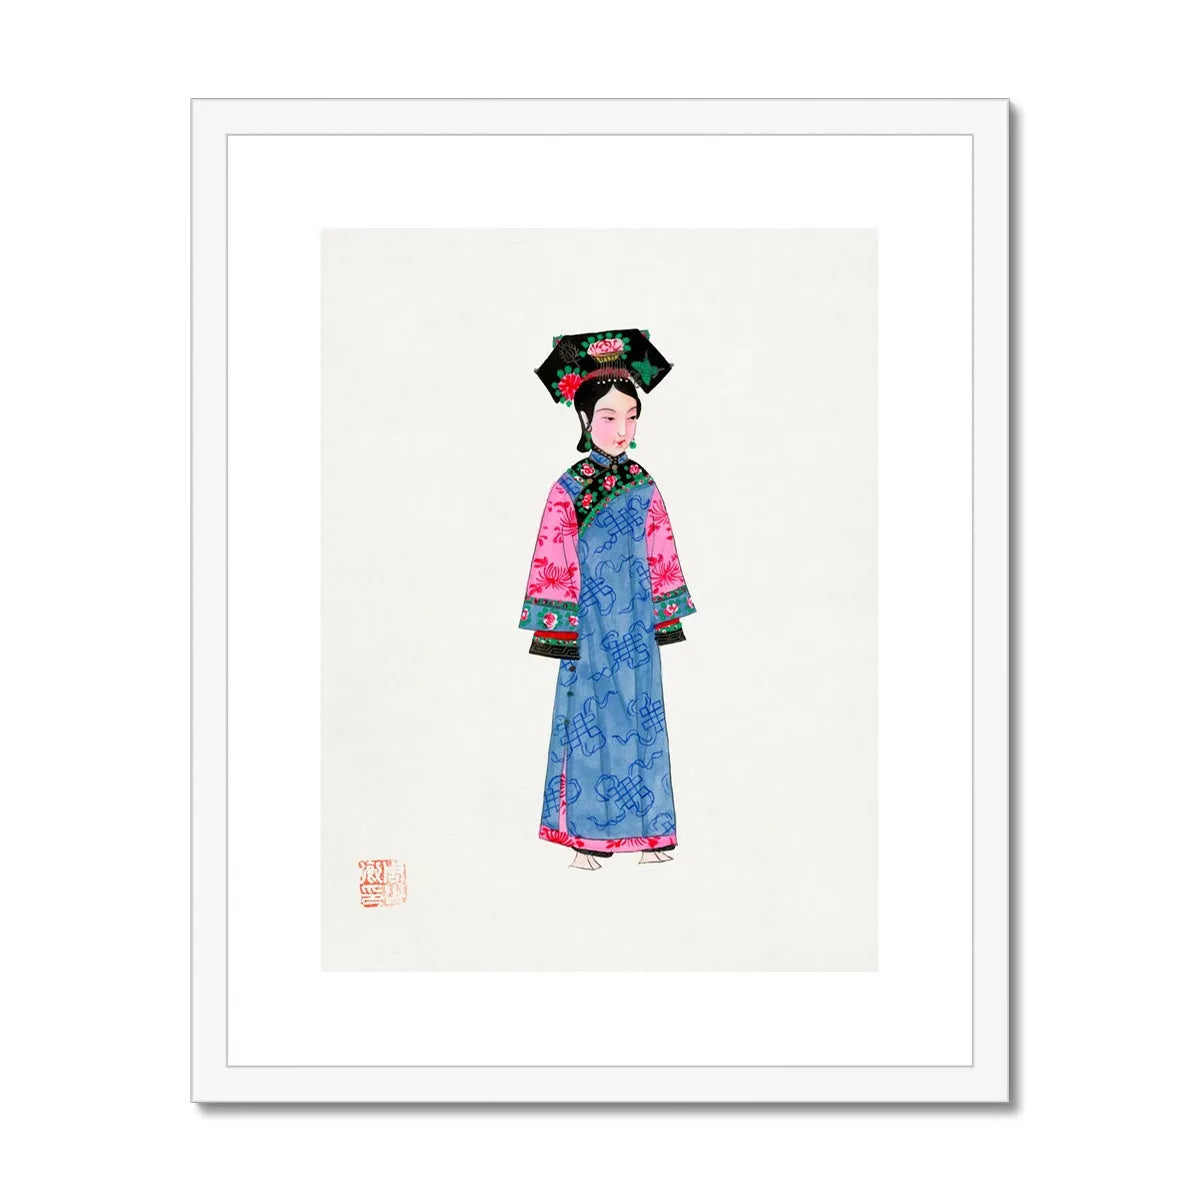 Chinese Noblewoman Too Framed & Mounted Print - 16’x20’ / White Frame - Posters Prints & Visual Artwork - Aesthetic Art